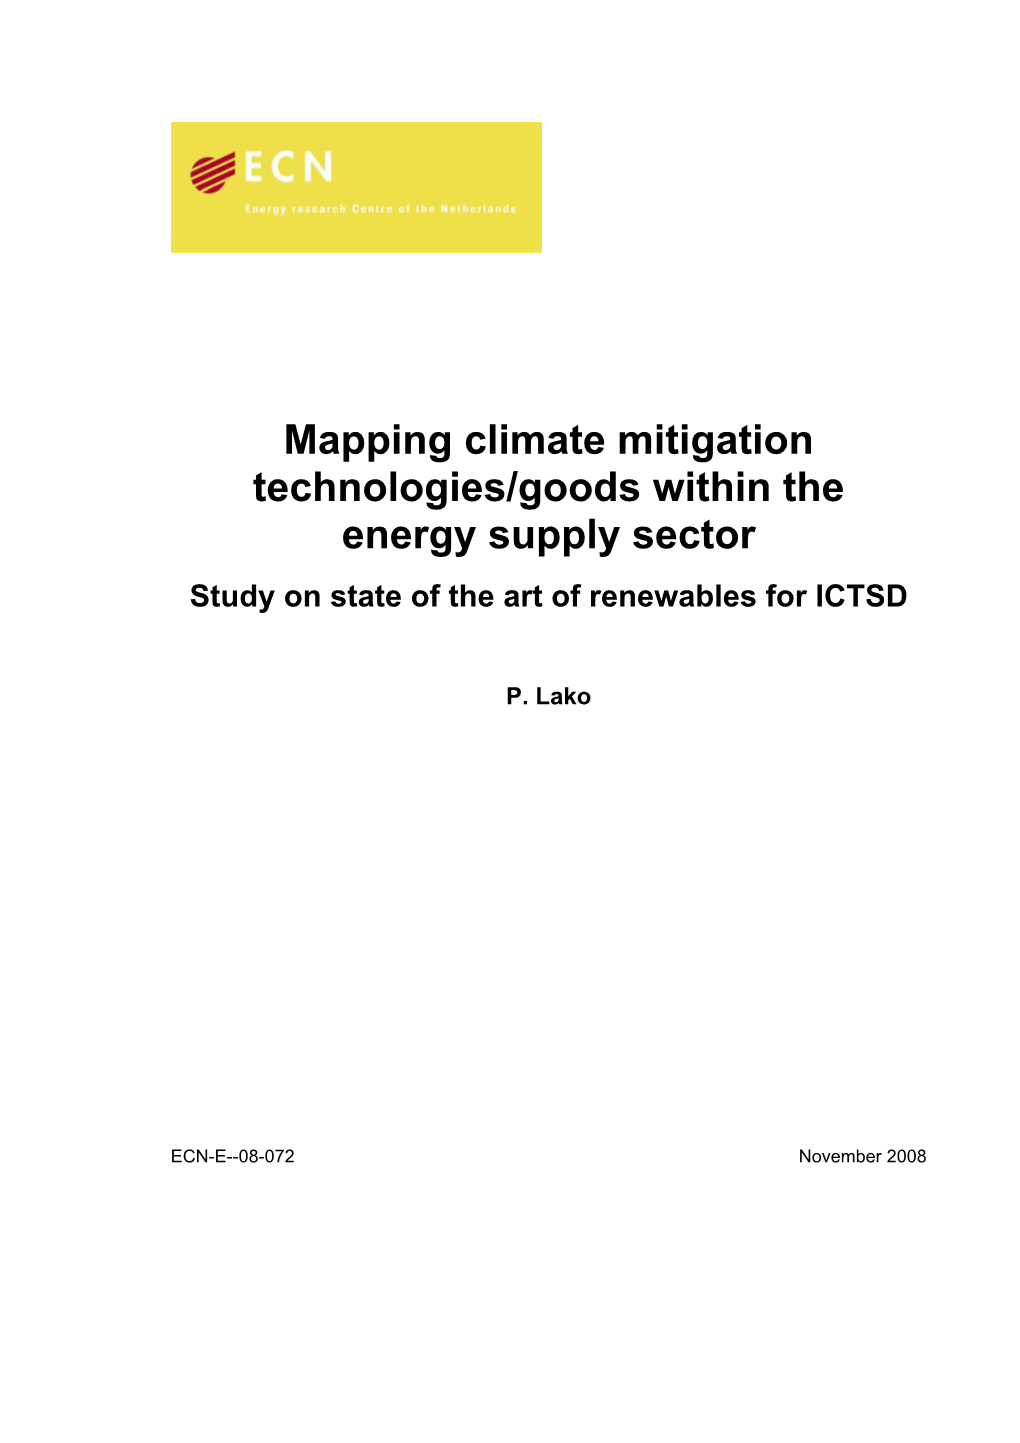 Mapping Climate Mitigation Technologies/Goods Within the Energy Supply Sector Study on State of the Art of Renewables for ICTSD